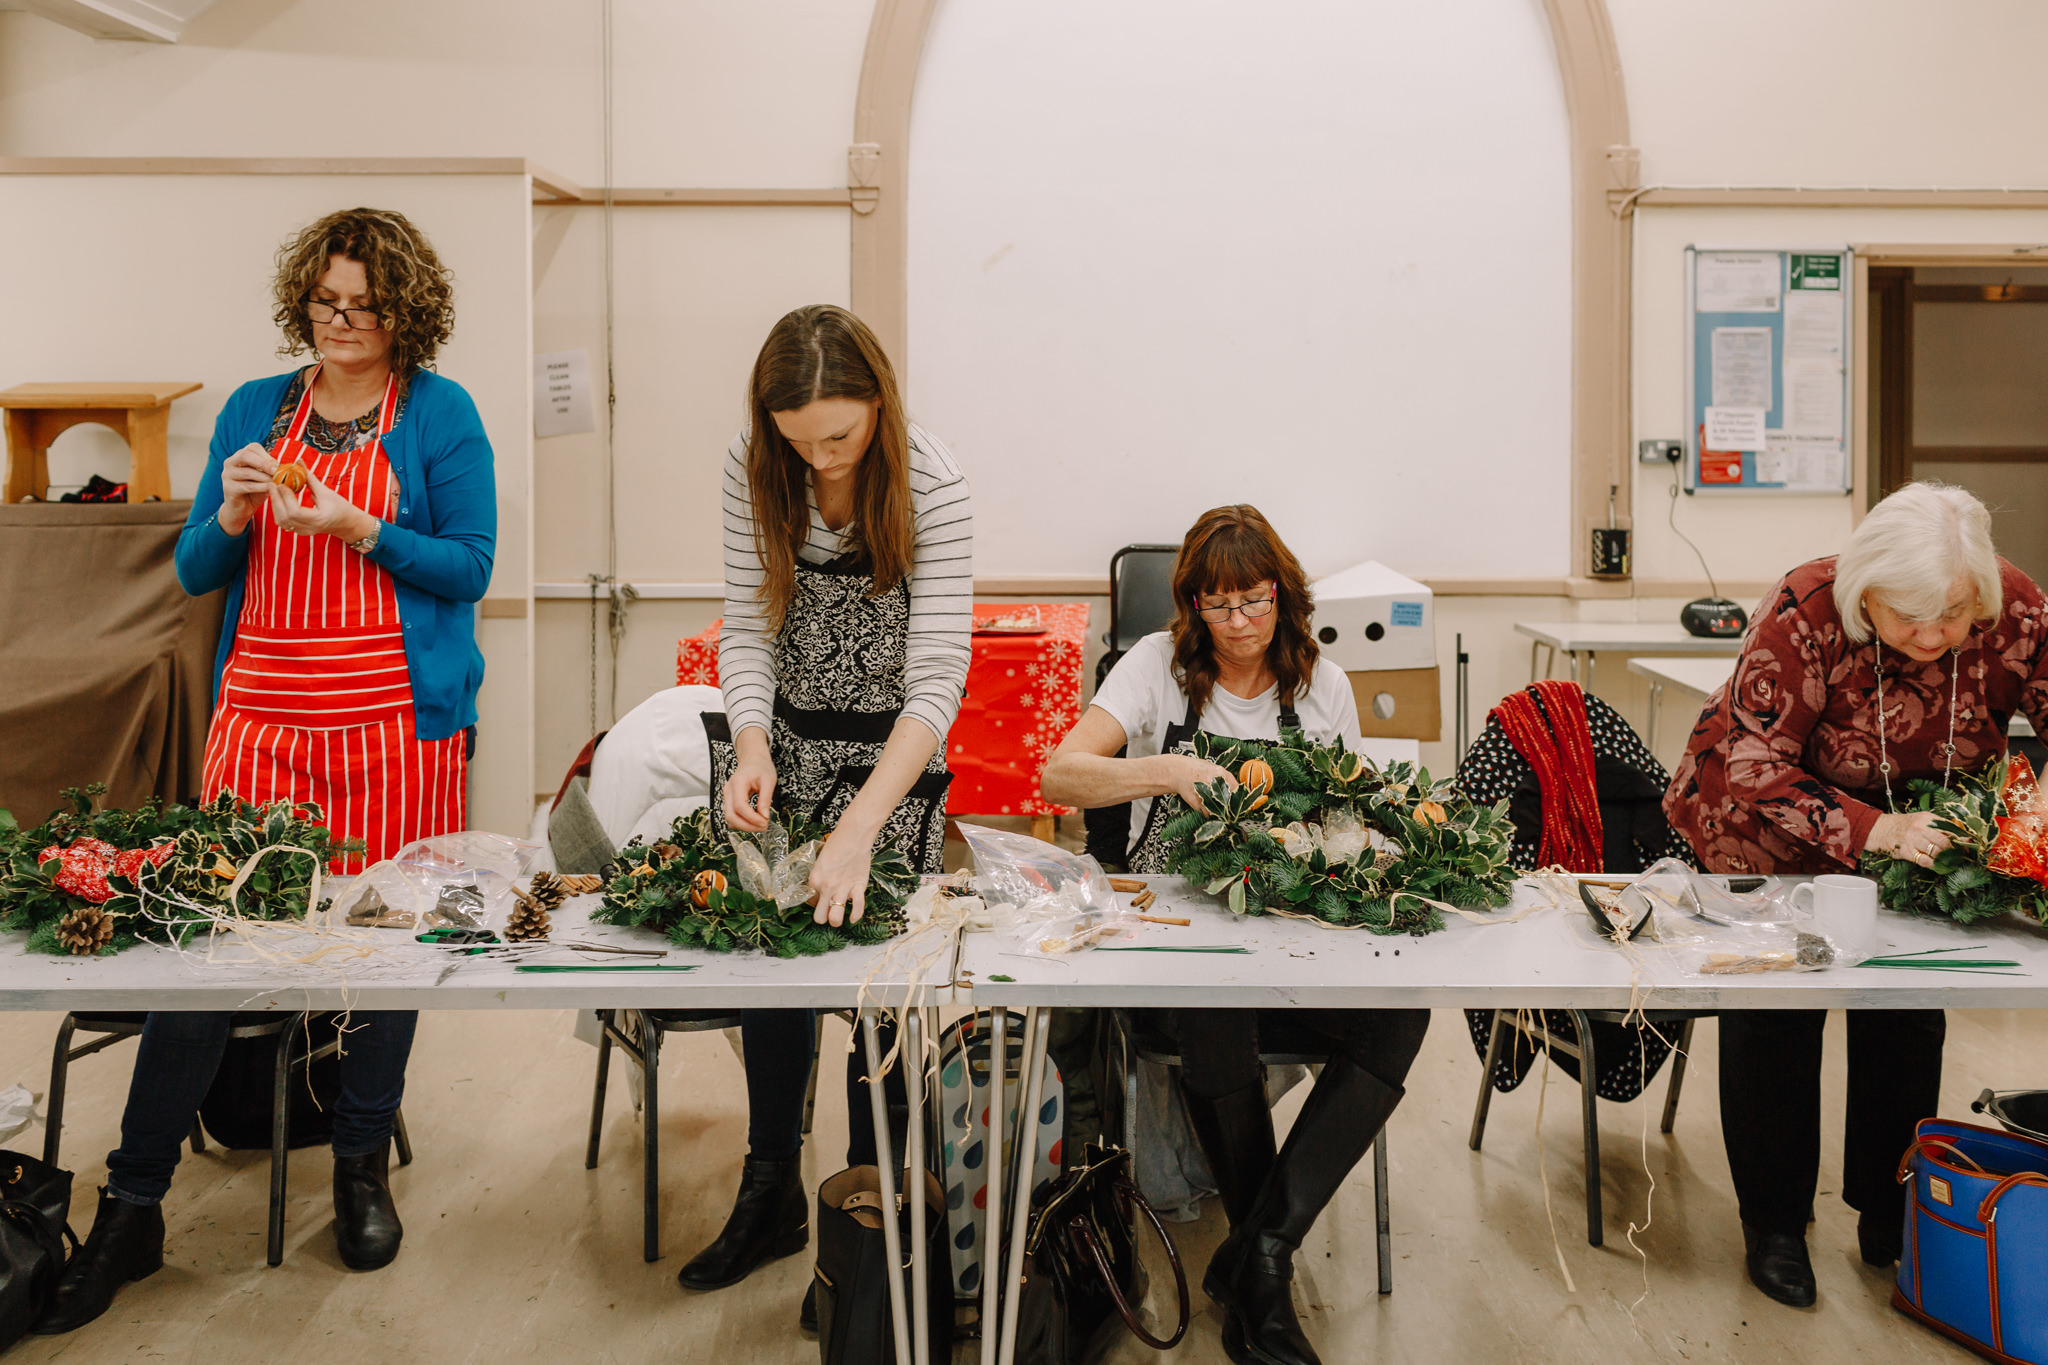 Women sit and stand at table making Christmas wreaths